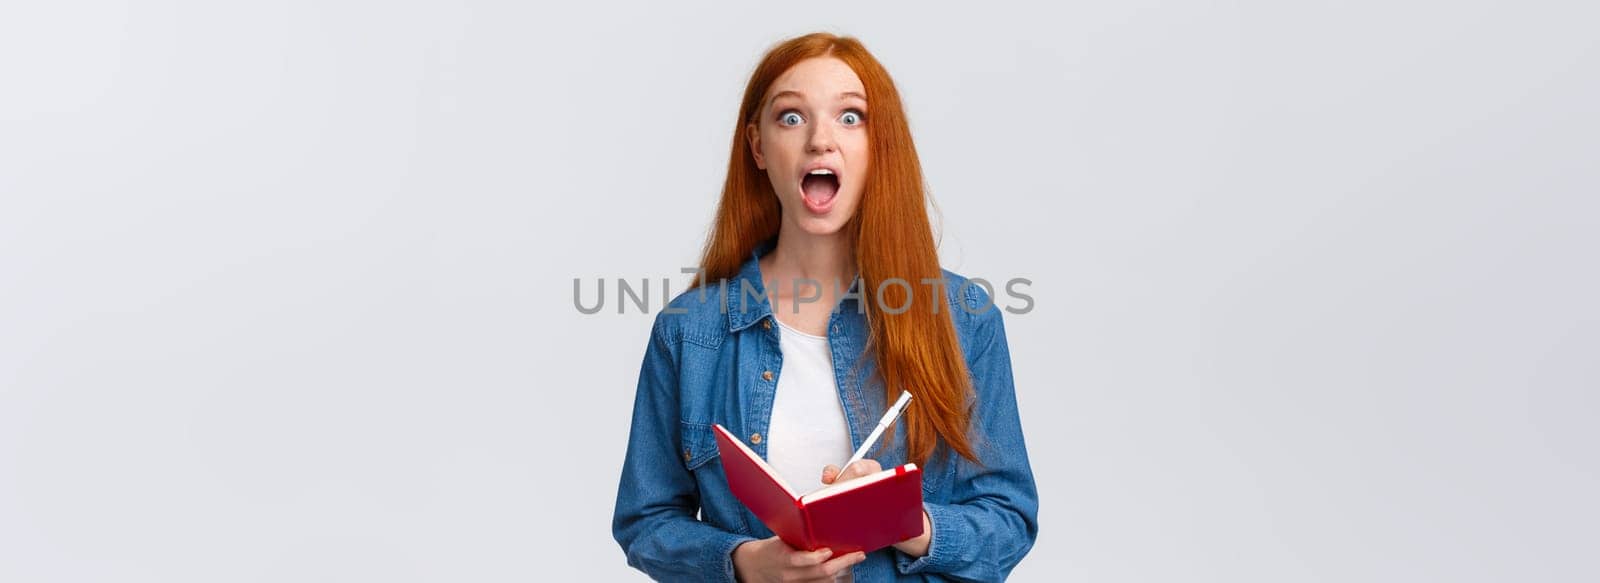 Amused and excited, astonished redhead girl fascinated with amazing lecture giving speech, writing down useful notes, holding notebook and staring thrilled camera, white background.